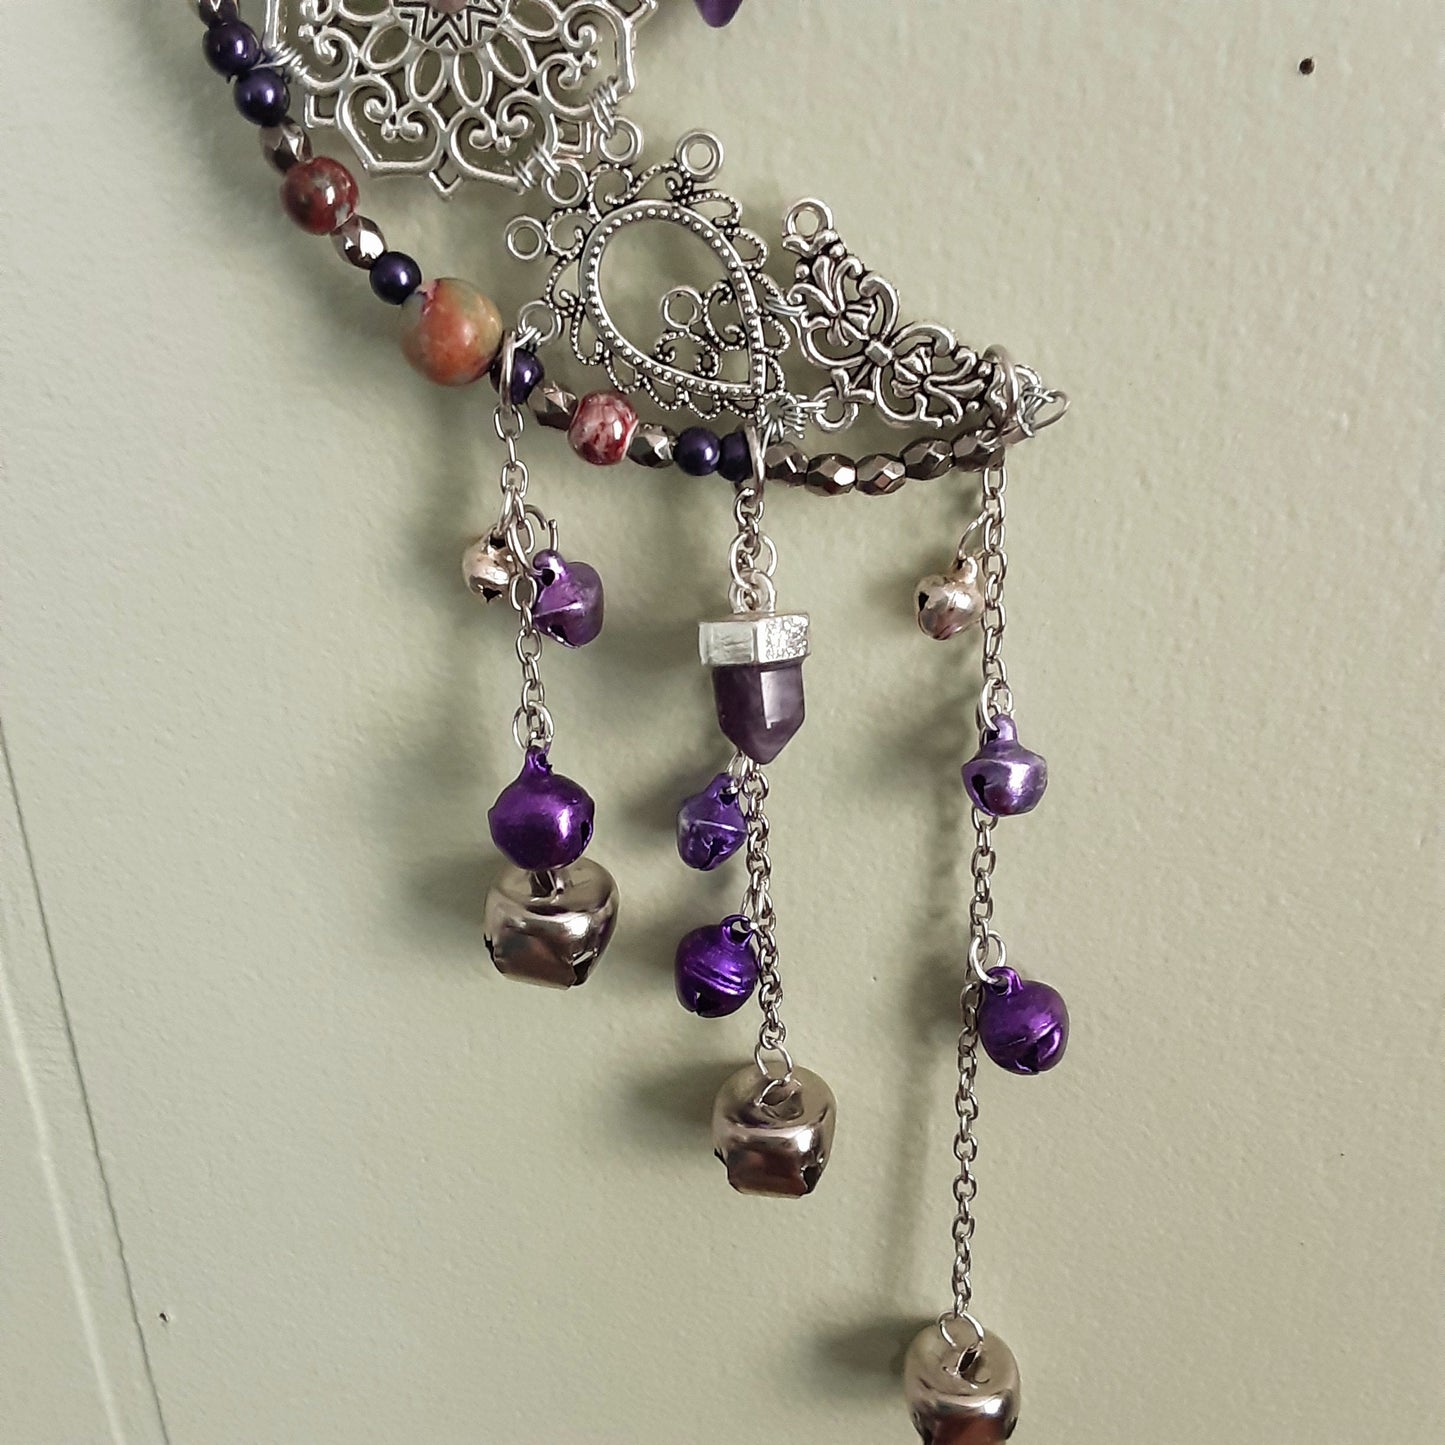 Amethyst and moon witch bells wall hanging